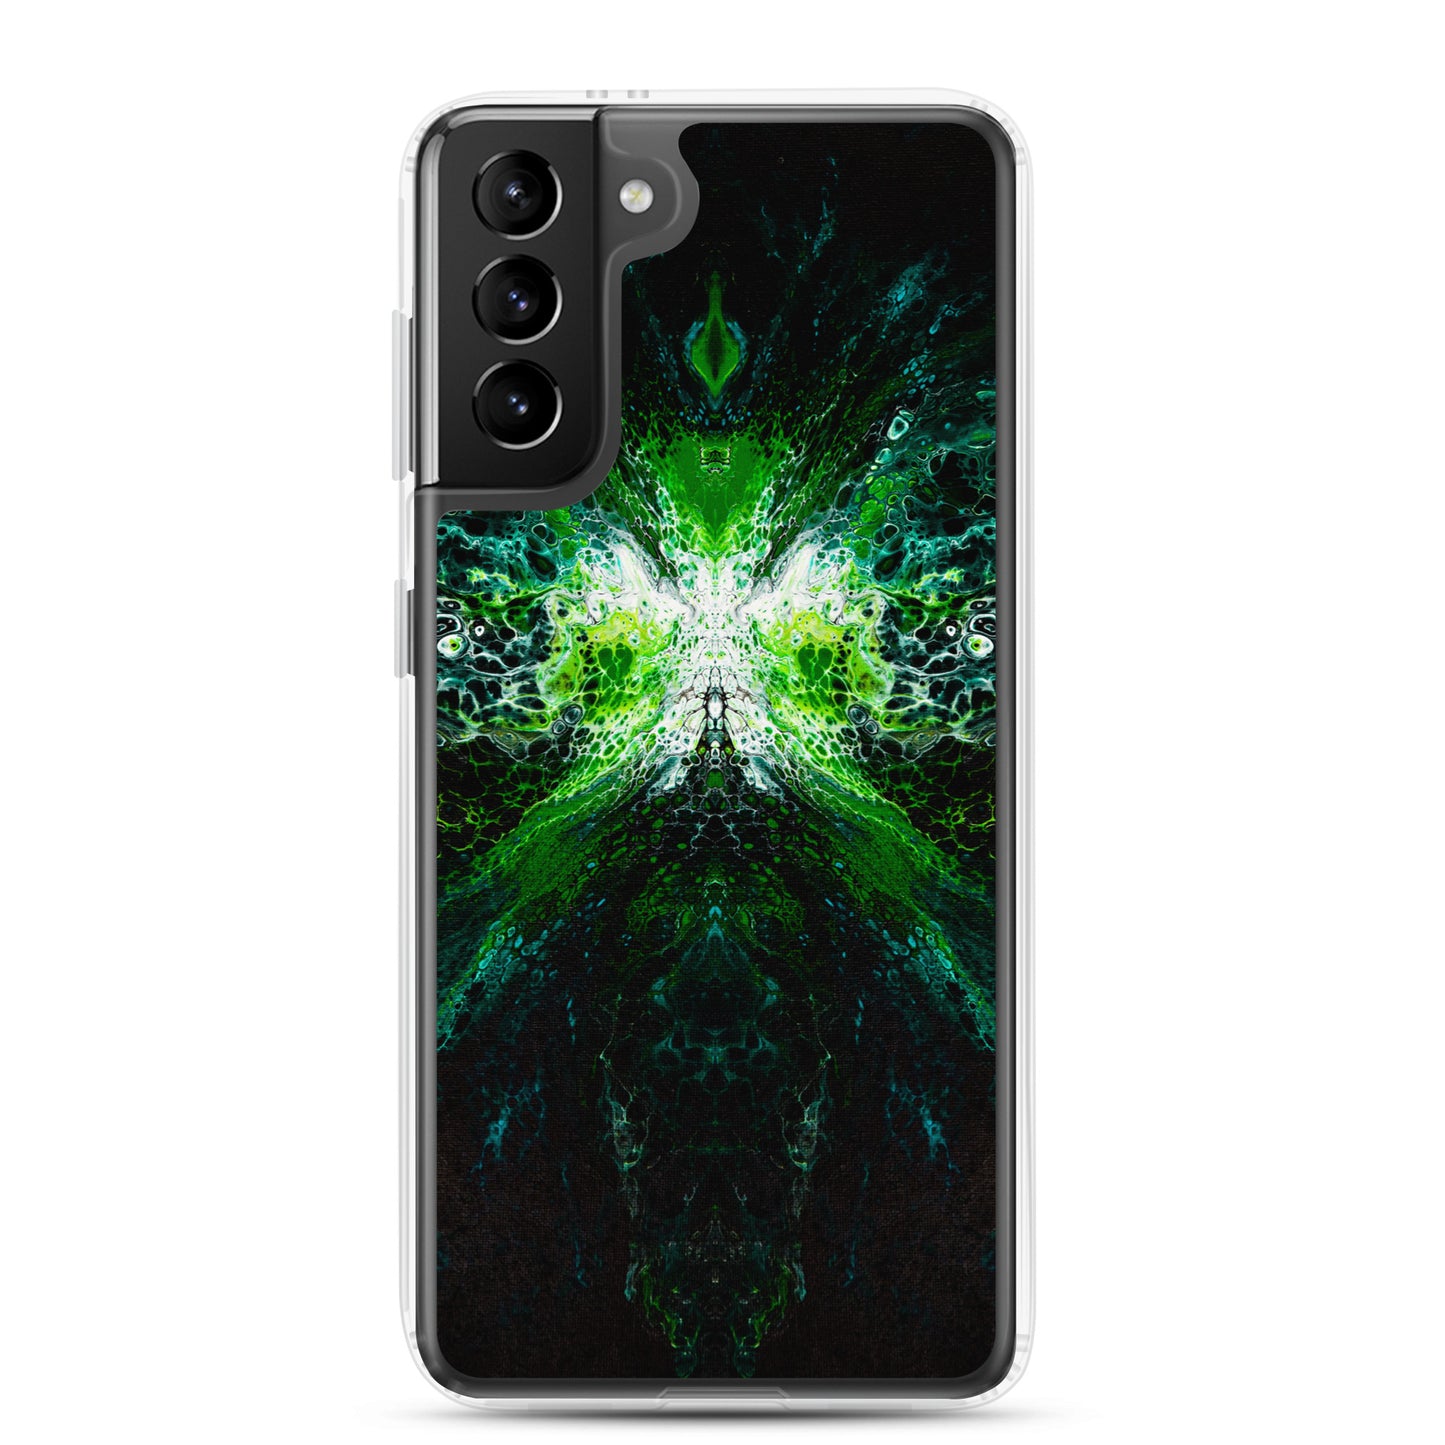 NightOwl Studio Custom Phone Case Compatible with Samsung Galaxy, Slim Cover for Wireless Charging, Drop and Scratch Resistant, Green Lantern